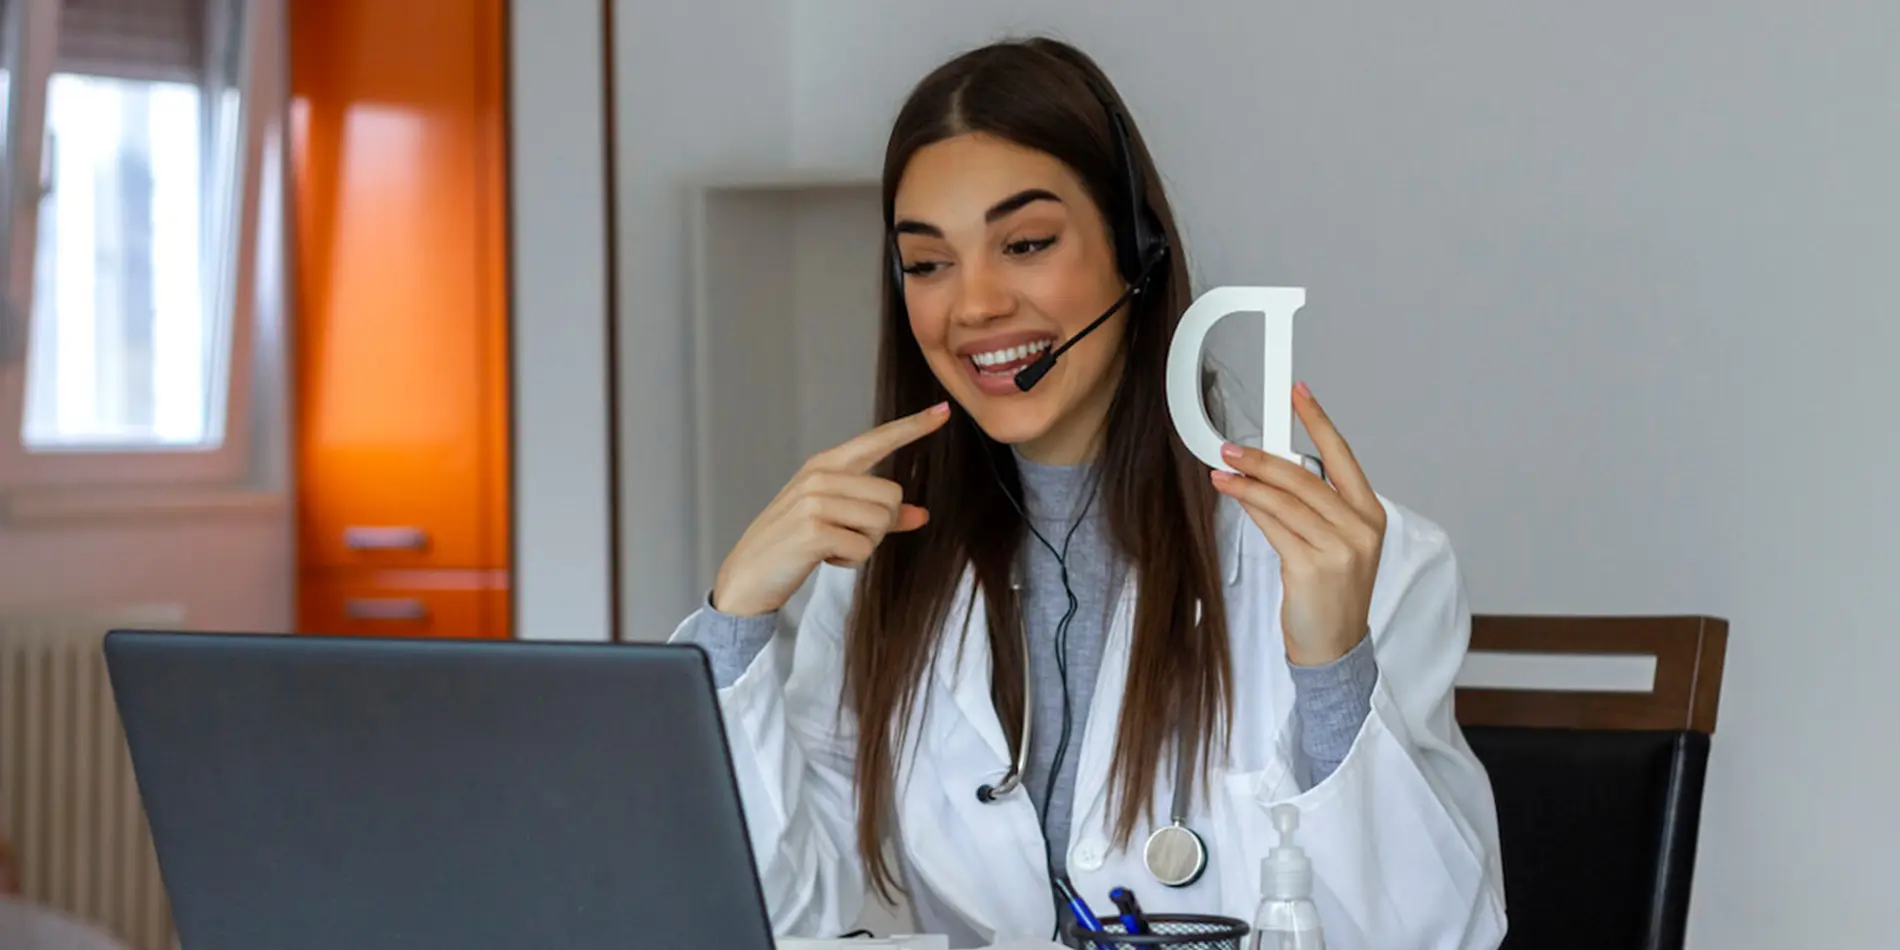 A person wearing a lab coat holds up a wooden letter "D" to an audience streaming on the laptop while wearing a headset.